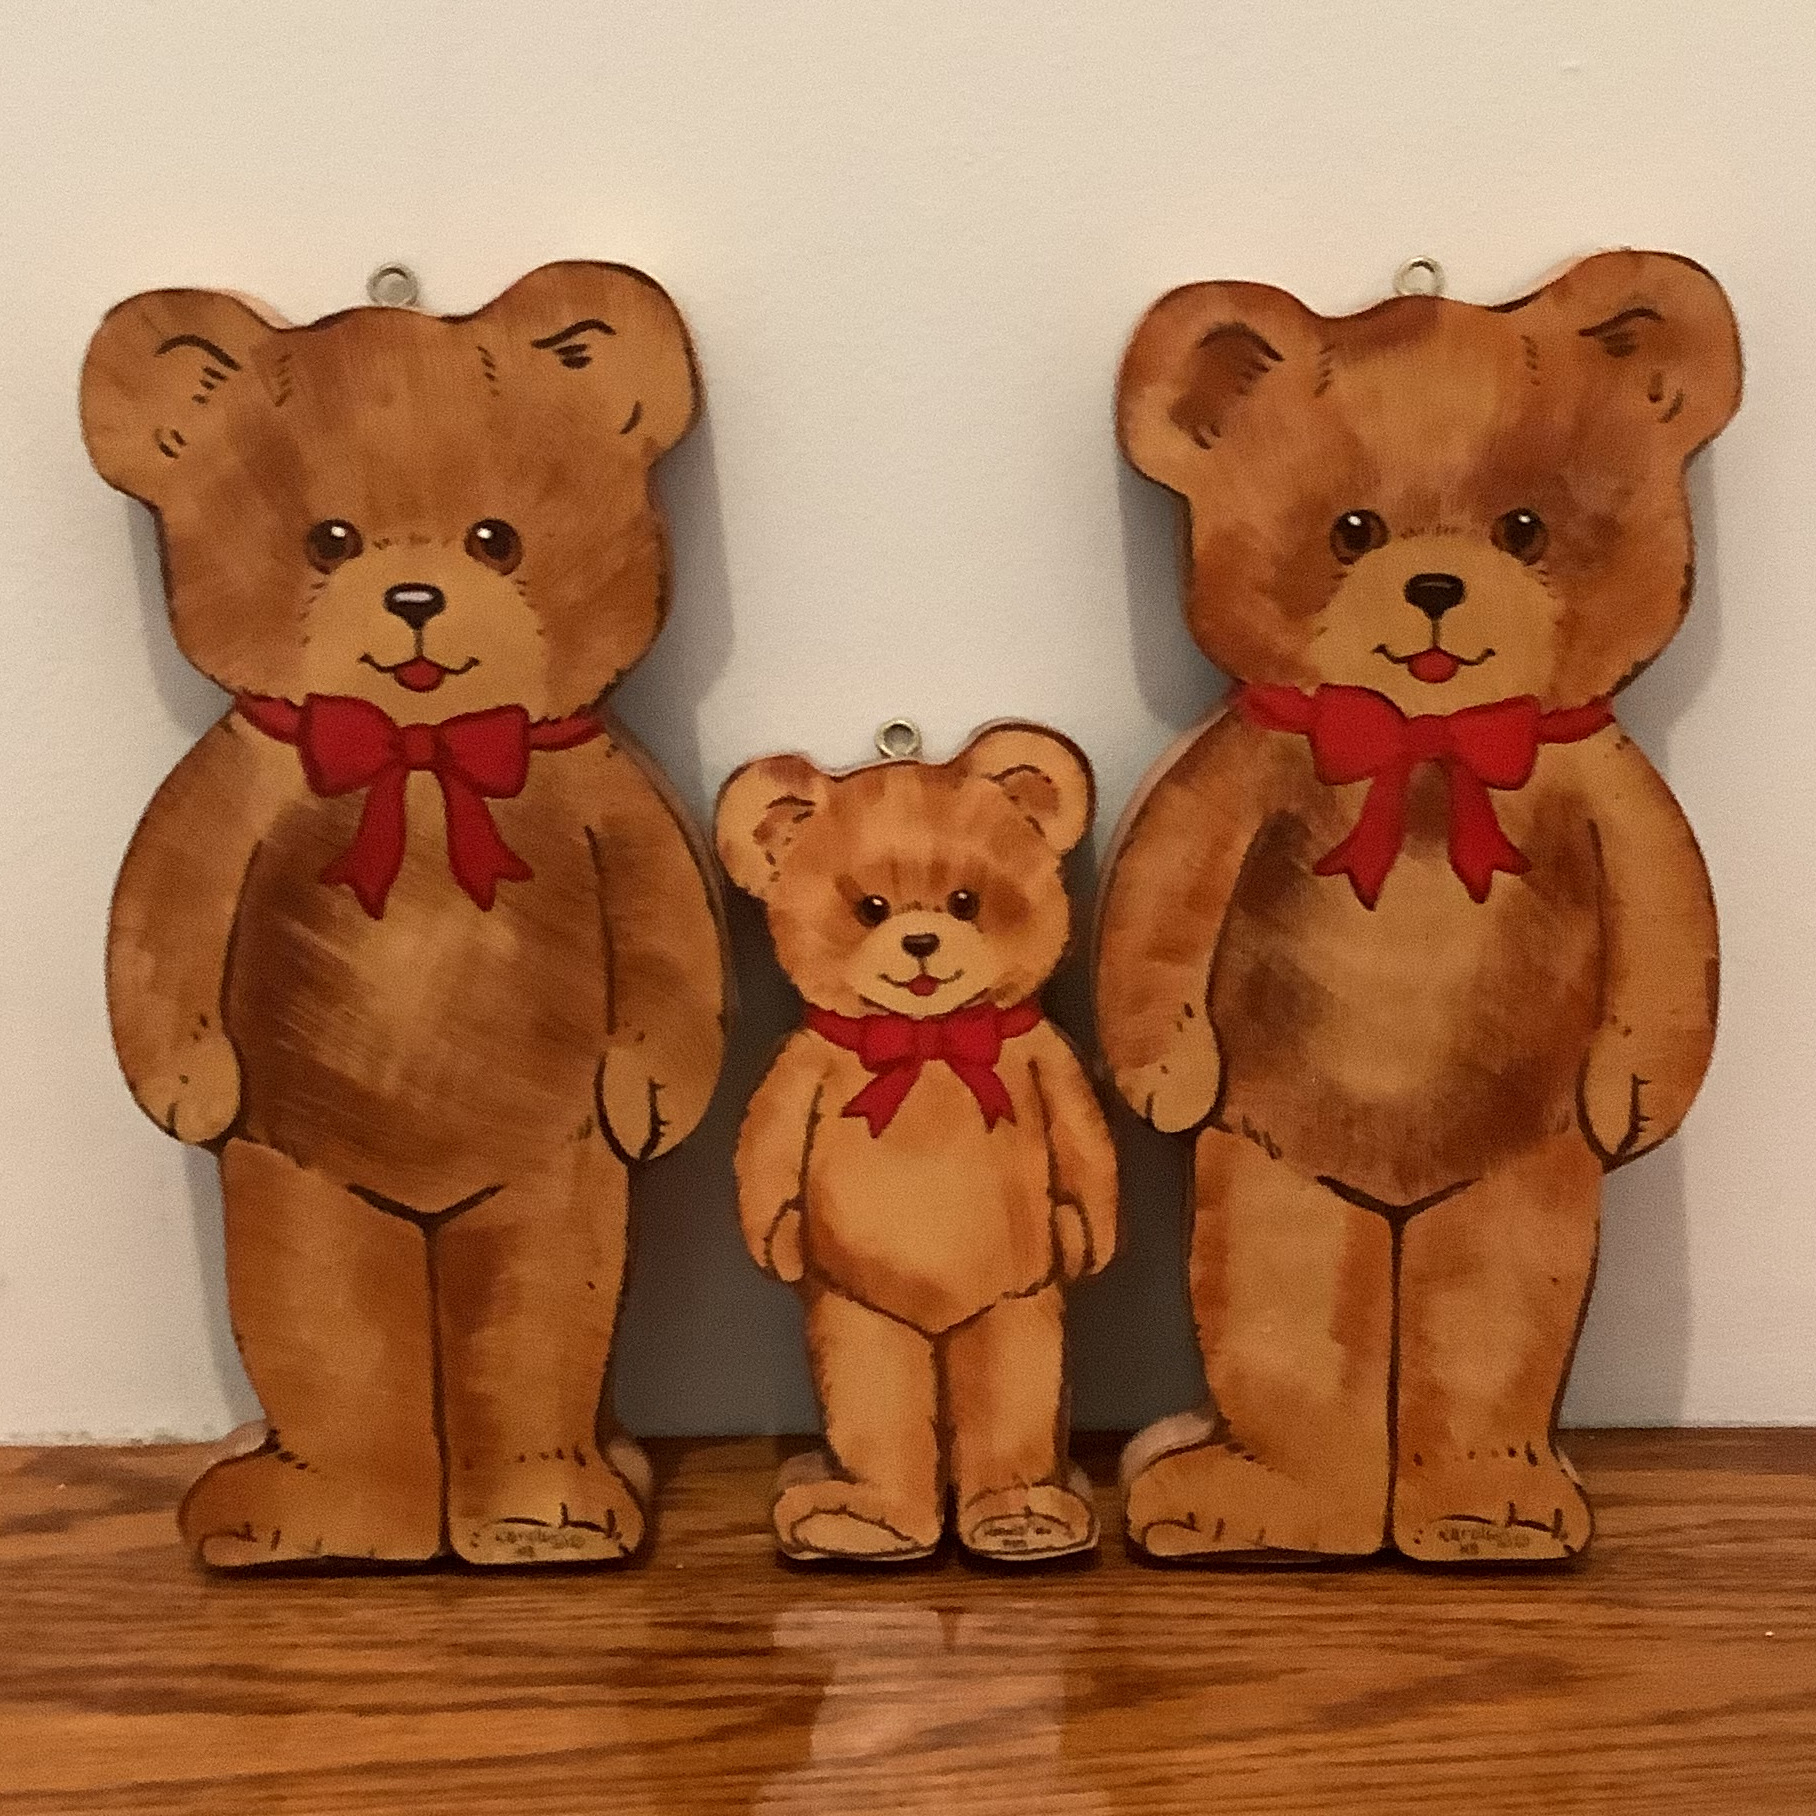 Flat wooden bear ornaments painted to look like realistic teddy bears, two large and one small